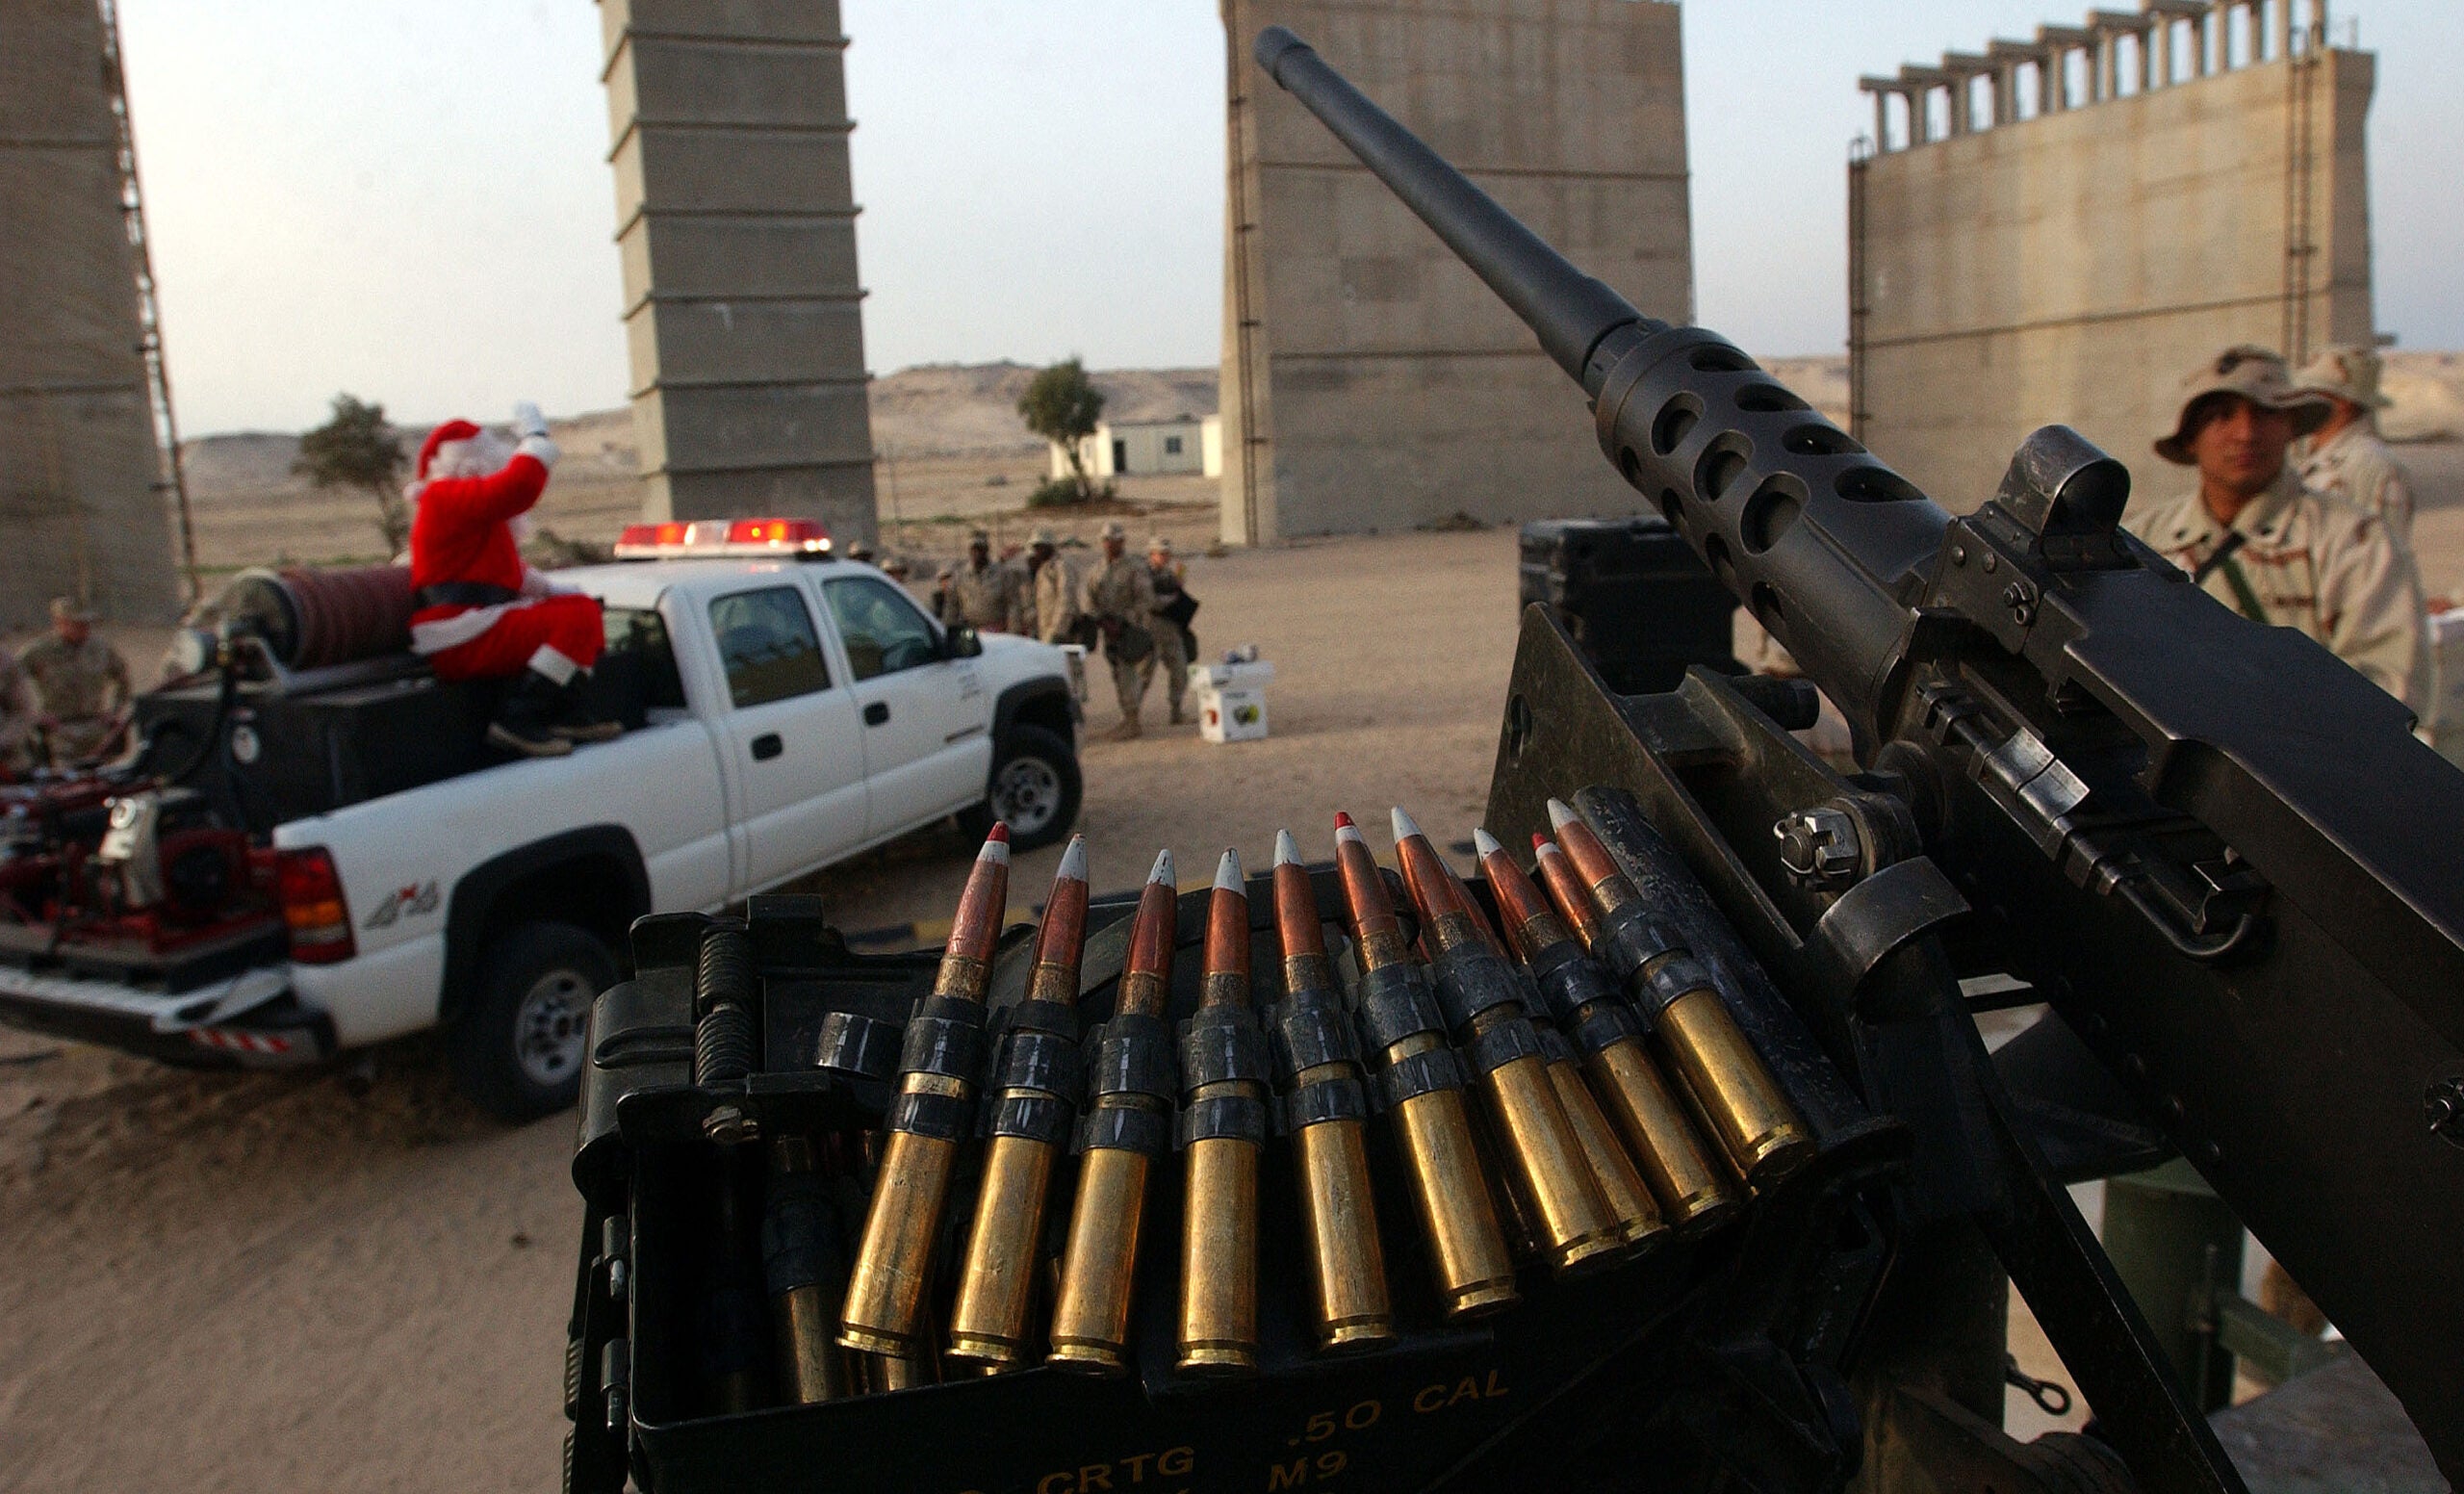 CAMP COMMANDO, KUWAIT - DECEMBER 24:  Santa Claus travels under the cover of a 50 caliber machine gun after passing out gifts to several hundred U.S. Marines of the 1st Marine Expeditionary Force stationed at Camp Commando in the Kuwaiti Desert during a December 24, 2002 Christmas Eve formation there. Santa passed out gifts from Kuwaiti residents and soldiers sang Christmas carols to celebrate the holiday season.  (Photo by Scott Nelson/Getty Images)